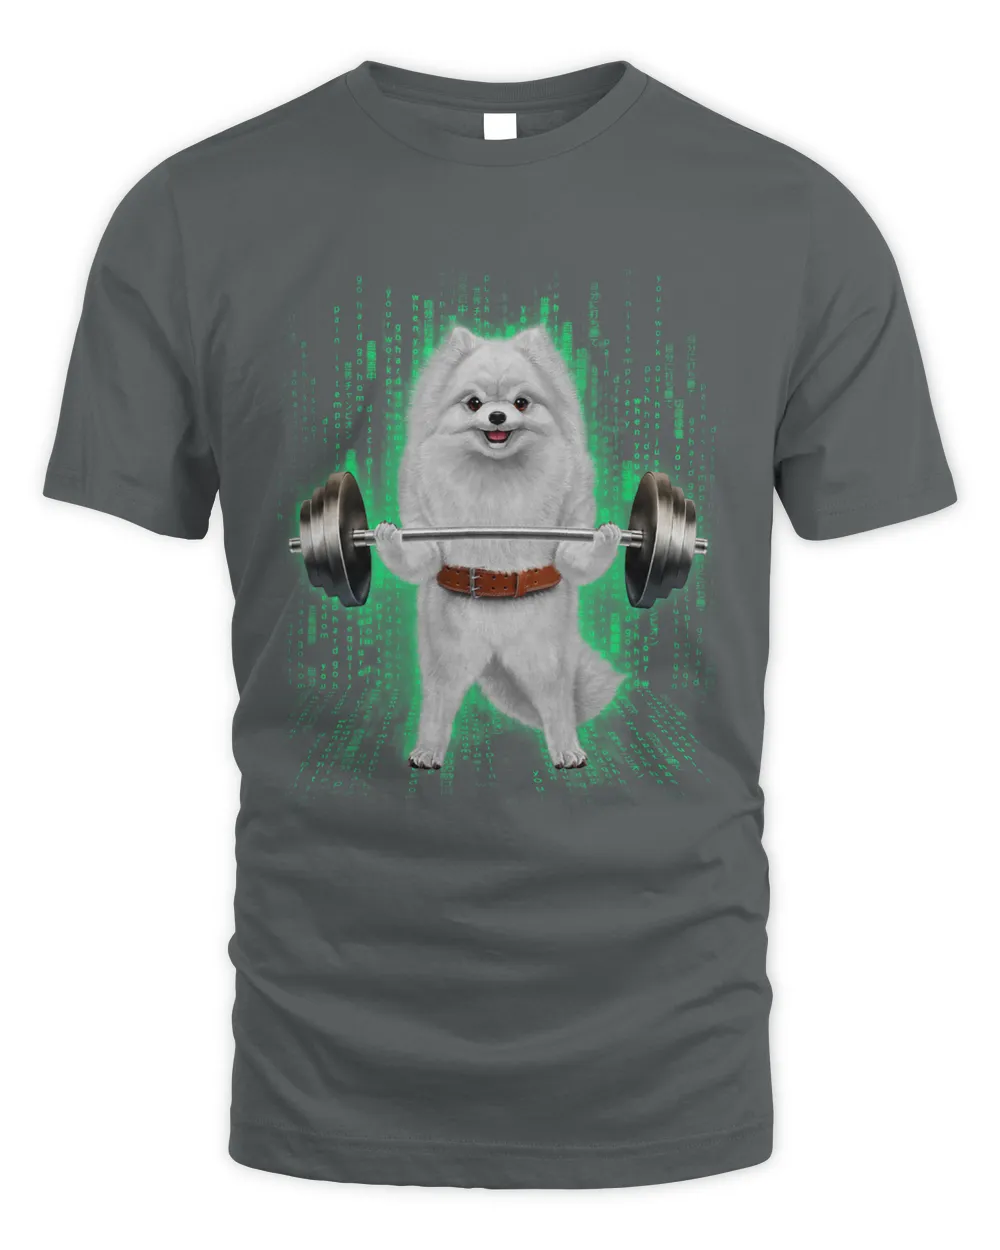 White Pomeranian Dog Weightlifting in Cyber Fitness Gym